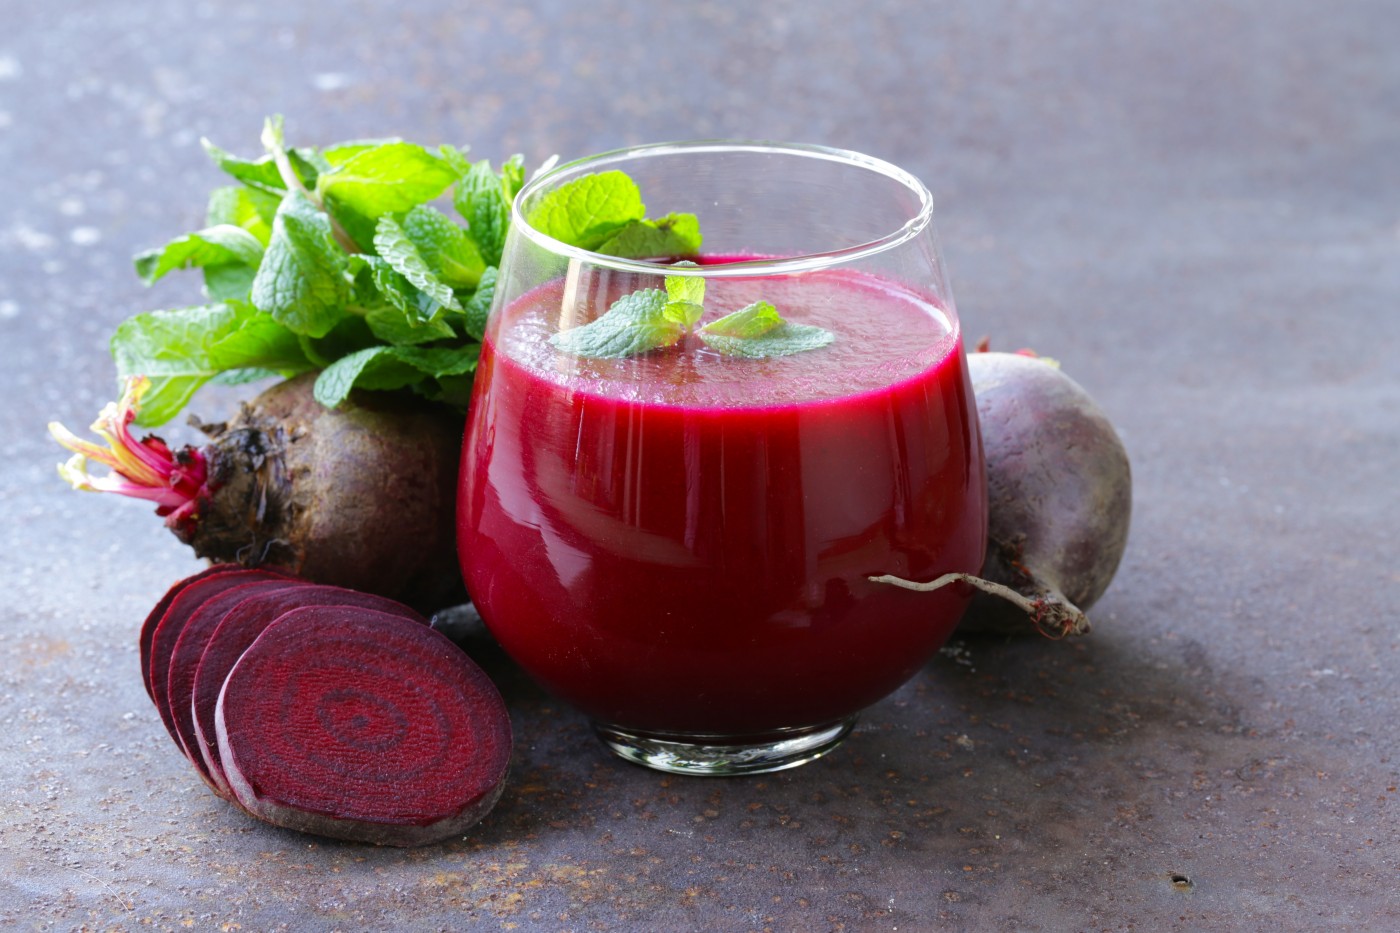 Beet Juice Found to Improve Muscle Strength in Patients with Heart Failure